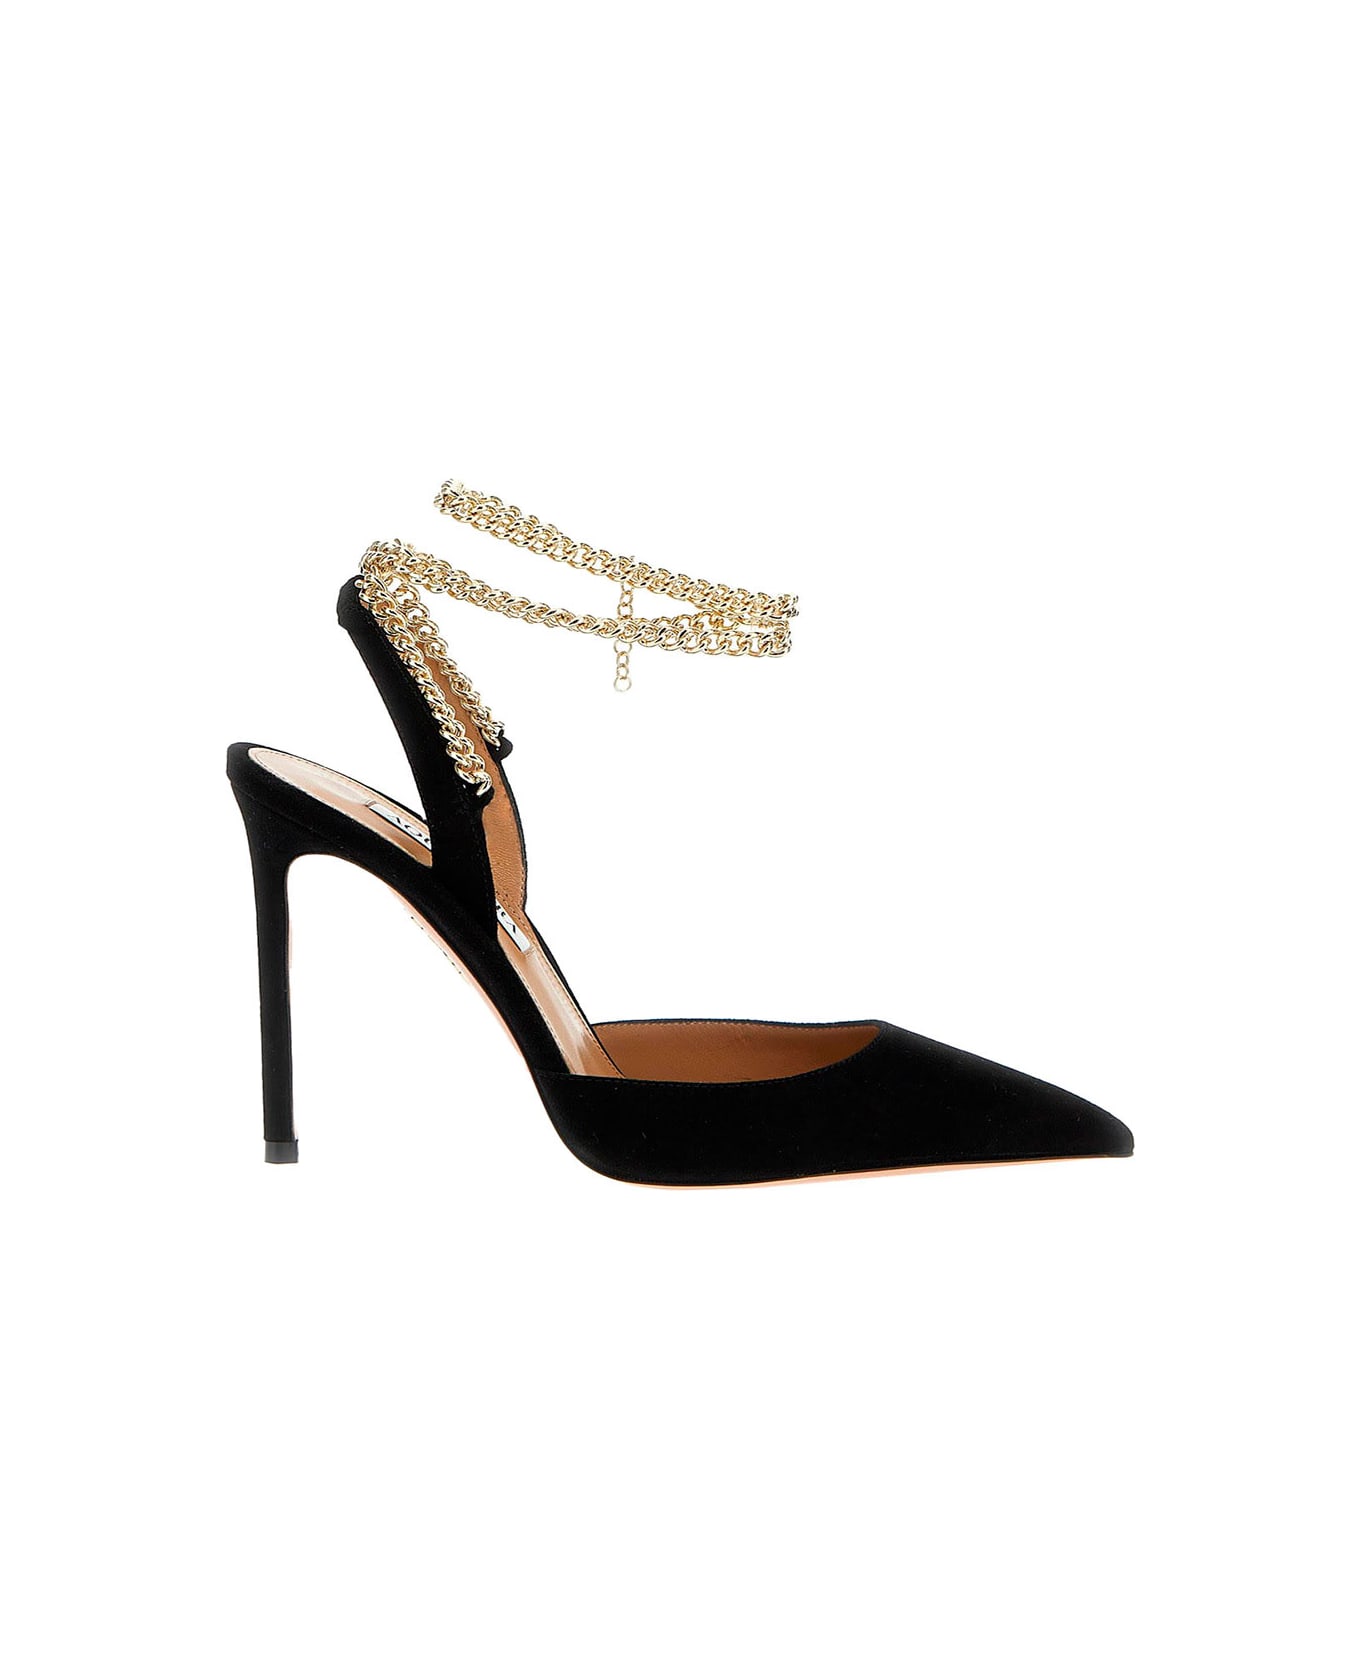 Aquazzura Black Slingback Pumps With Chain Ankle Strap In Leather Woman - Black ハイヒール